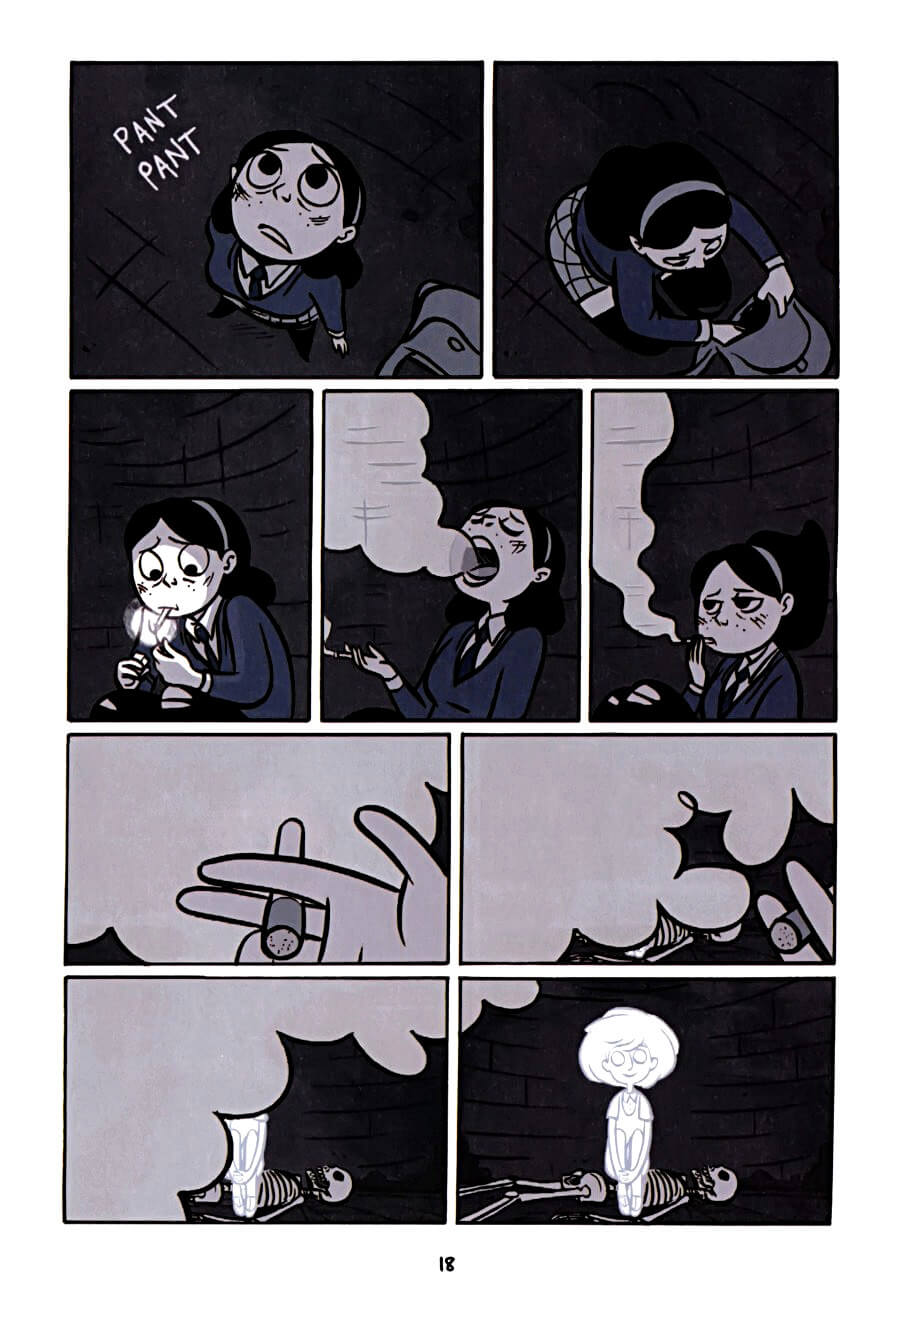 page 18 of anya's ghost graphic novel